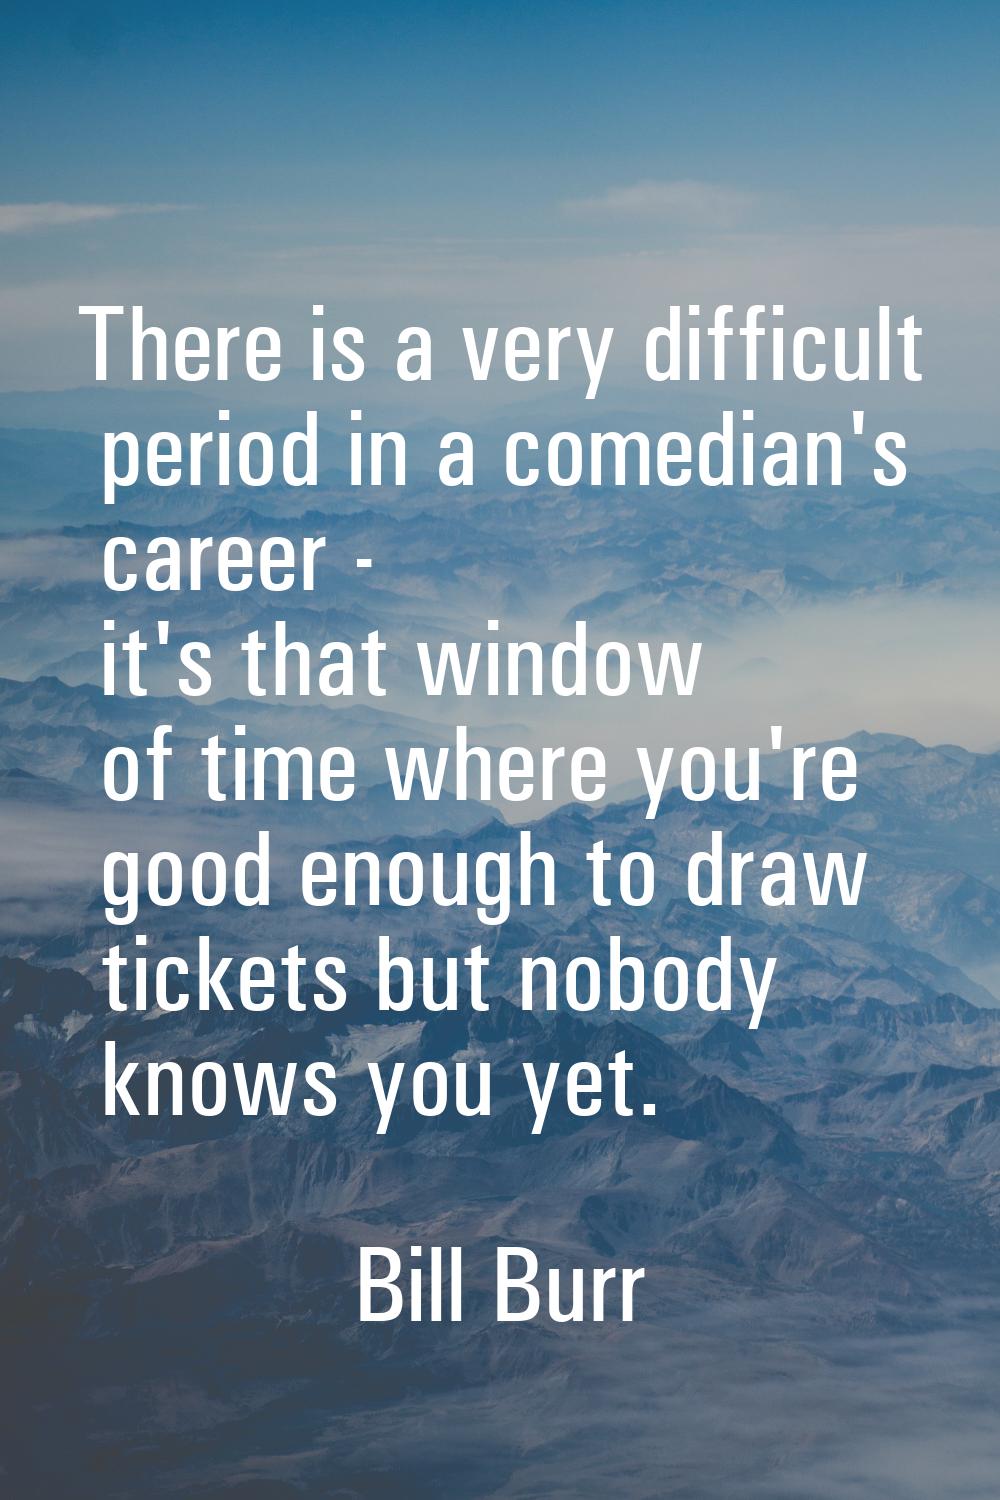 There is a very difficult period in a comedian's career - it's that window of time where you're goo